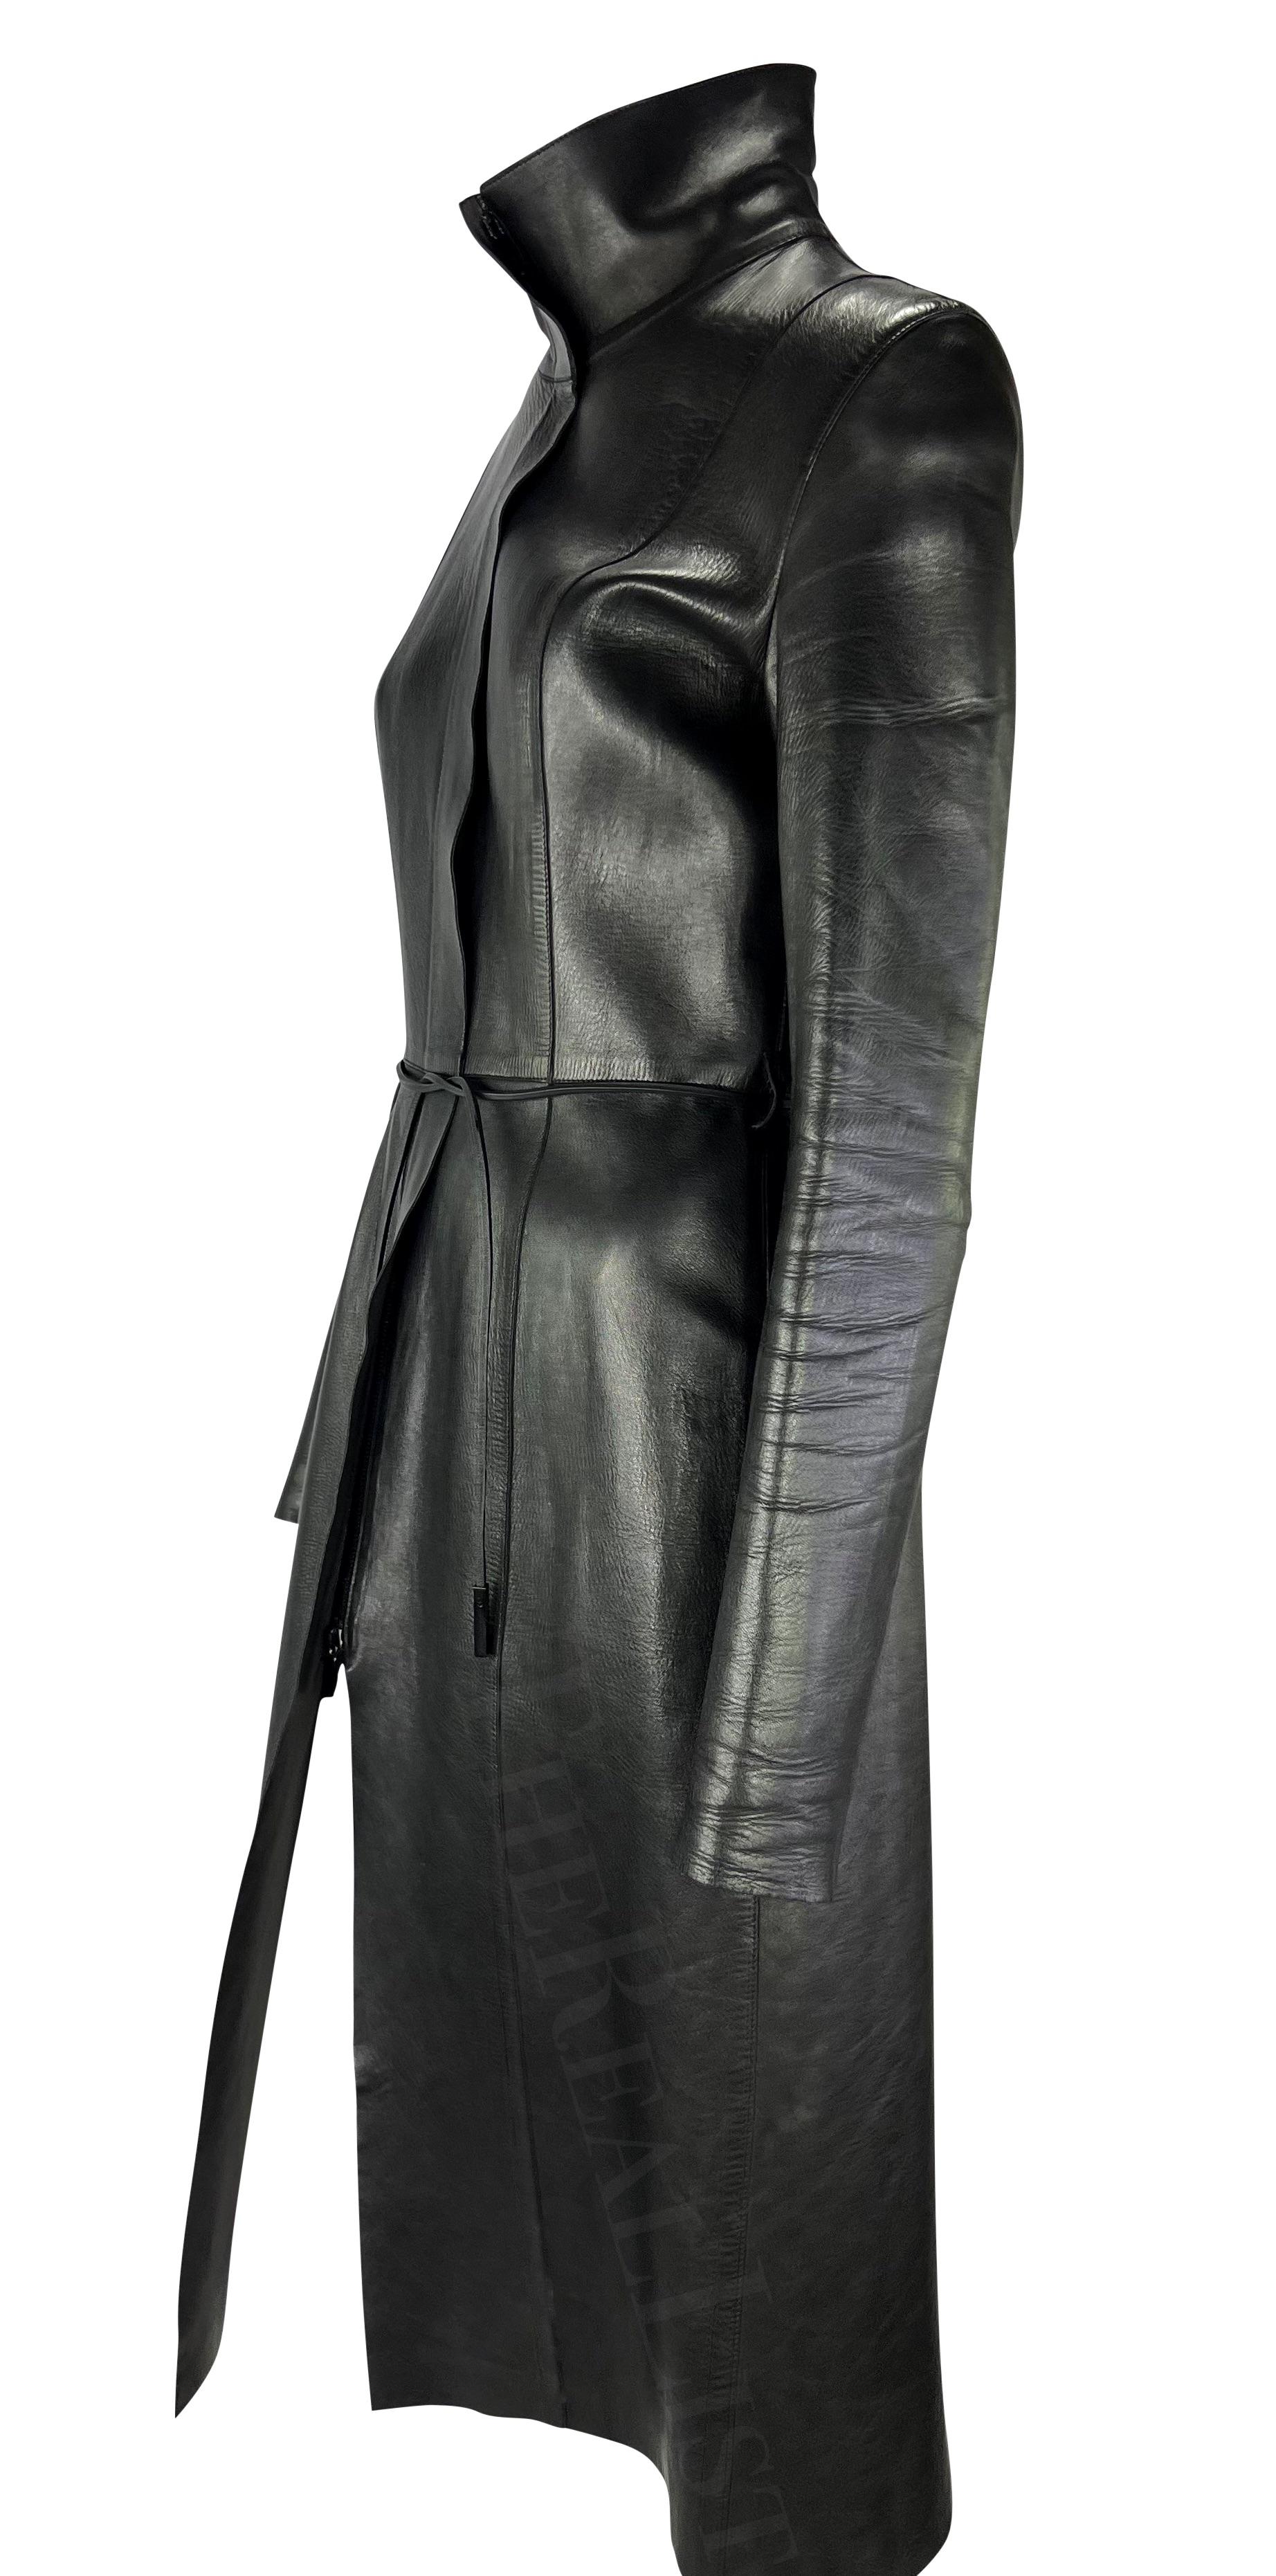 Presenting a fabulous black leather Gucci trench coat, designed by Tom Ford. From the Fall/Winter 1999 collection, this coat is constructed entirely of leather and features a stand-up collar, hidden zipper closure, and matching leather belt.